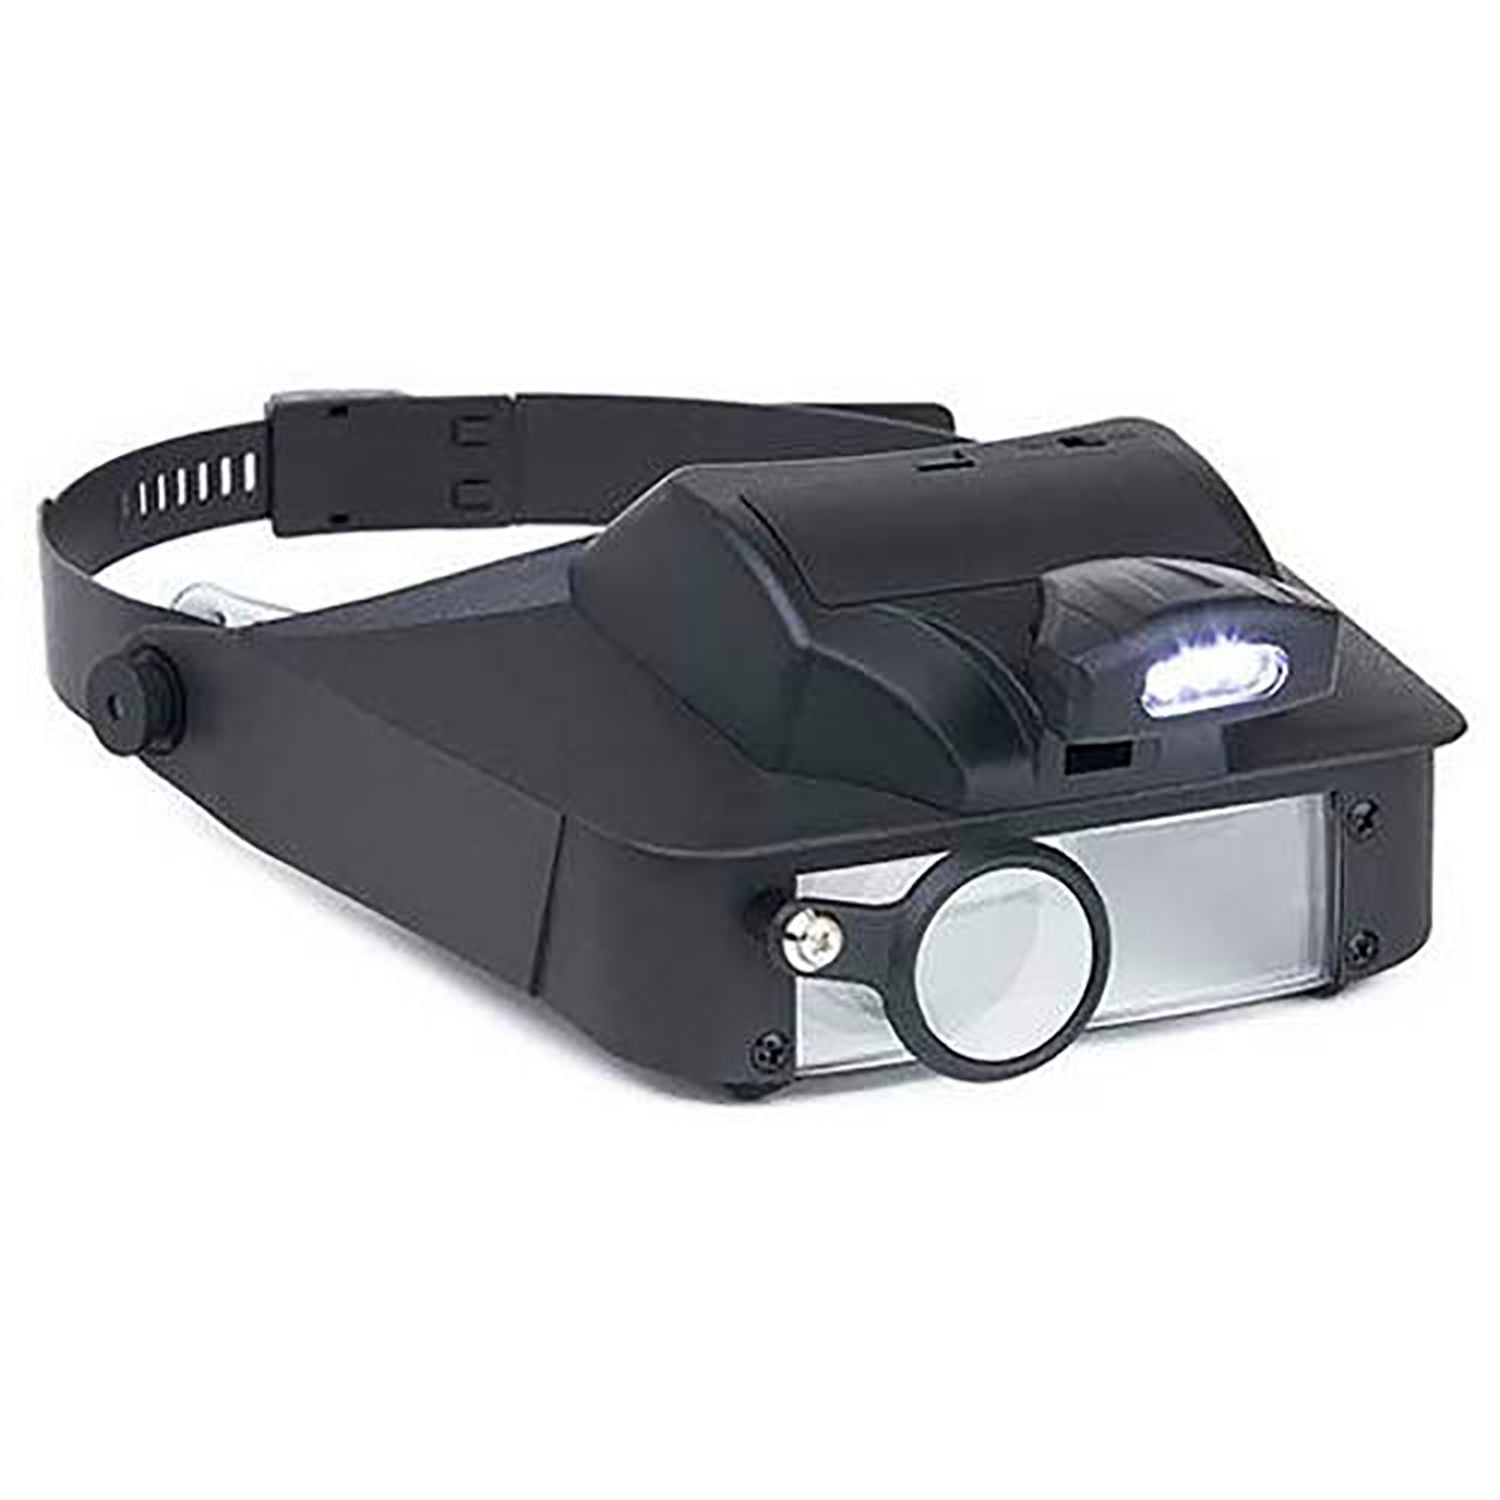 iFCOW Head Mounted Magnifier with LED Light Head Magnifier Glasses for Circuit Repair Hobby 